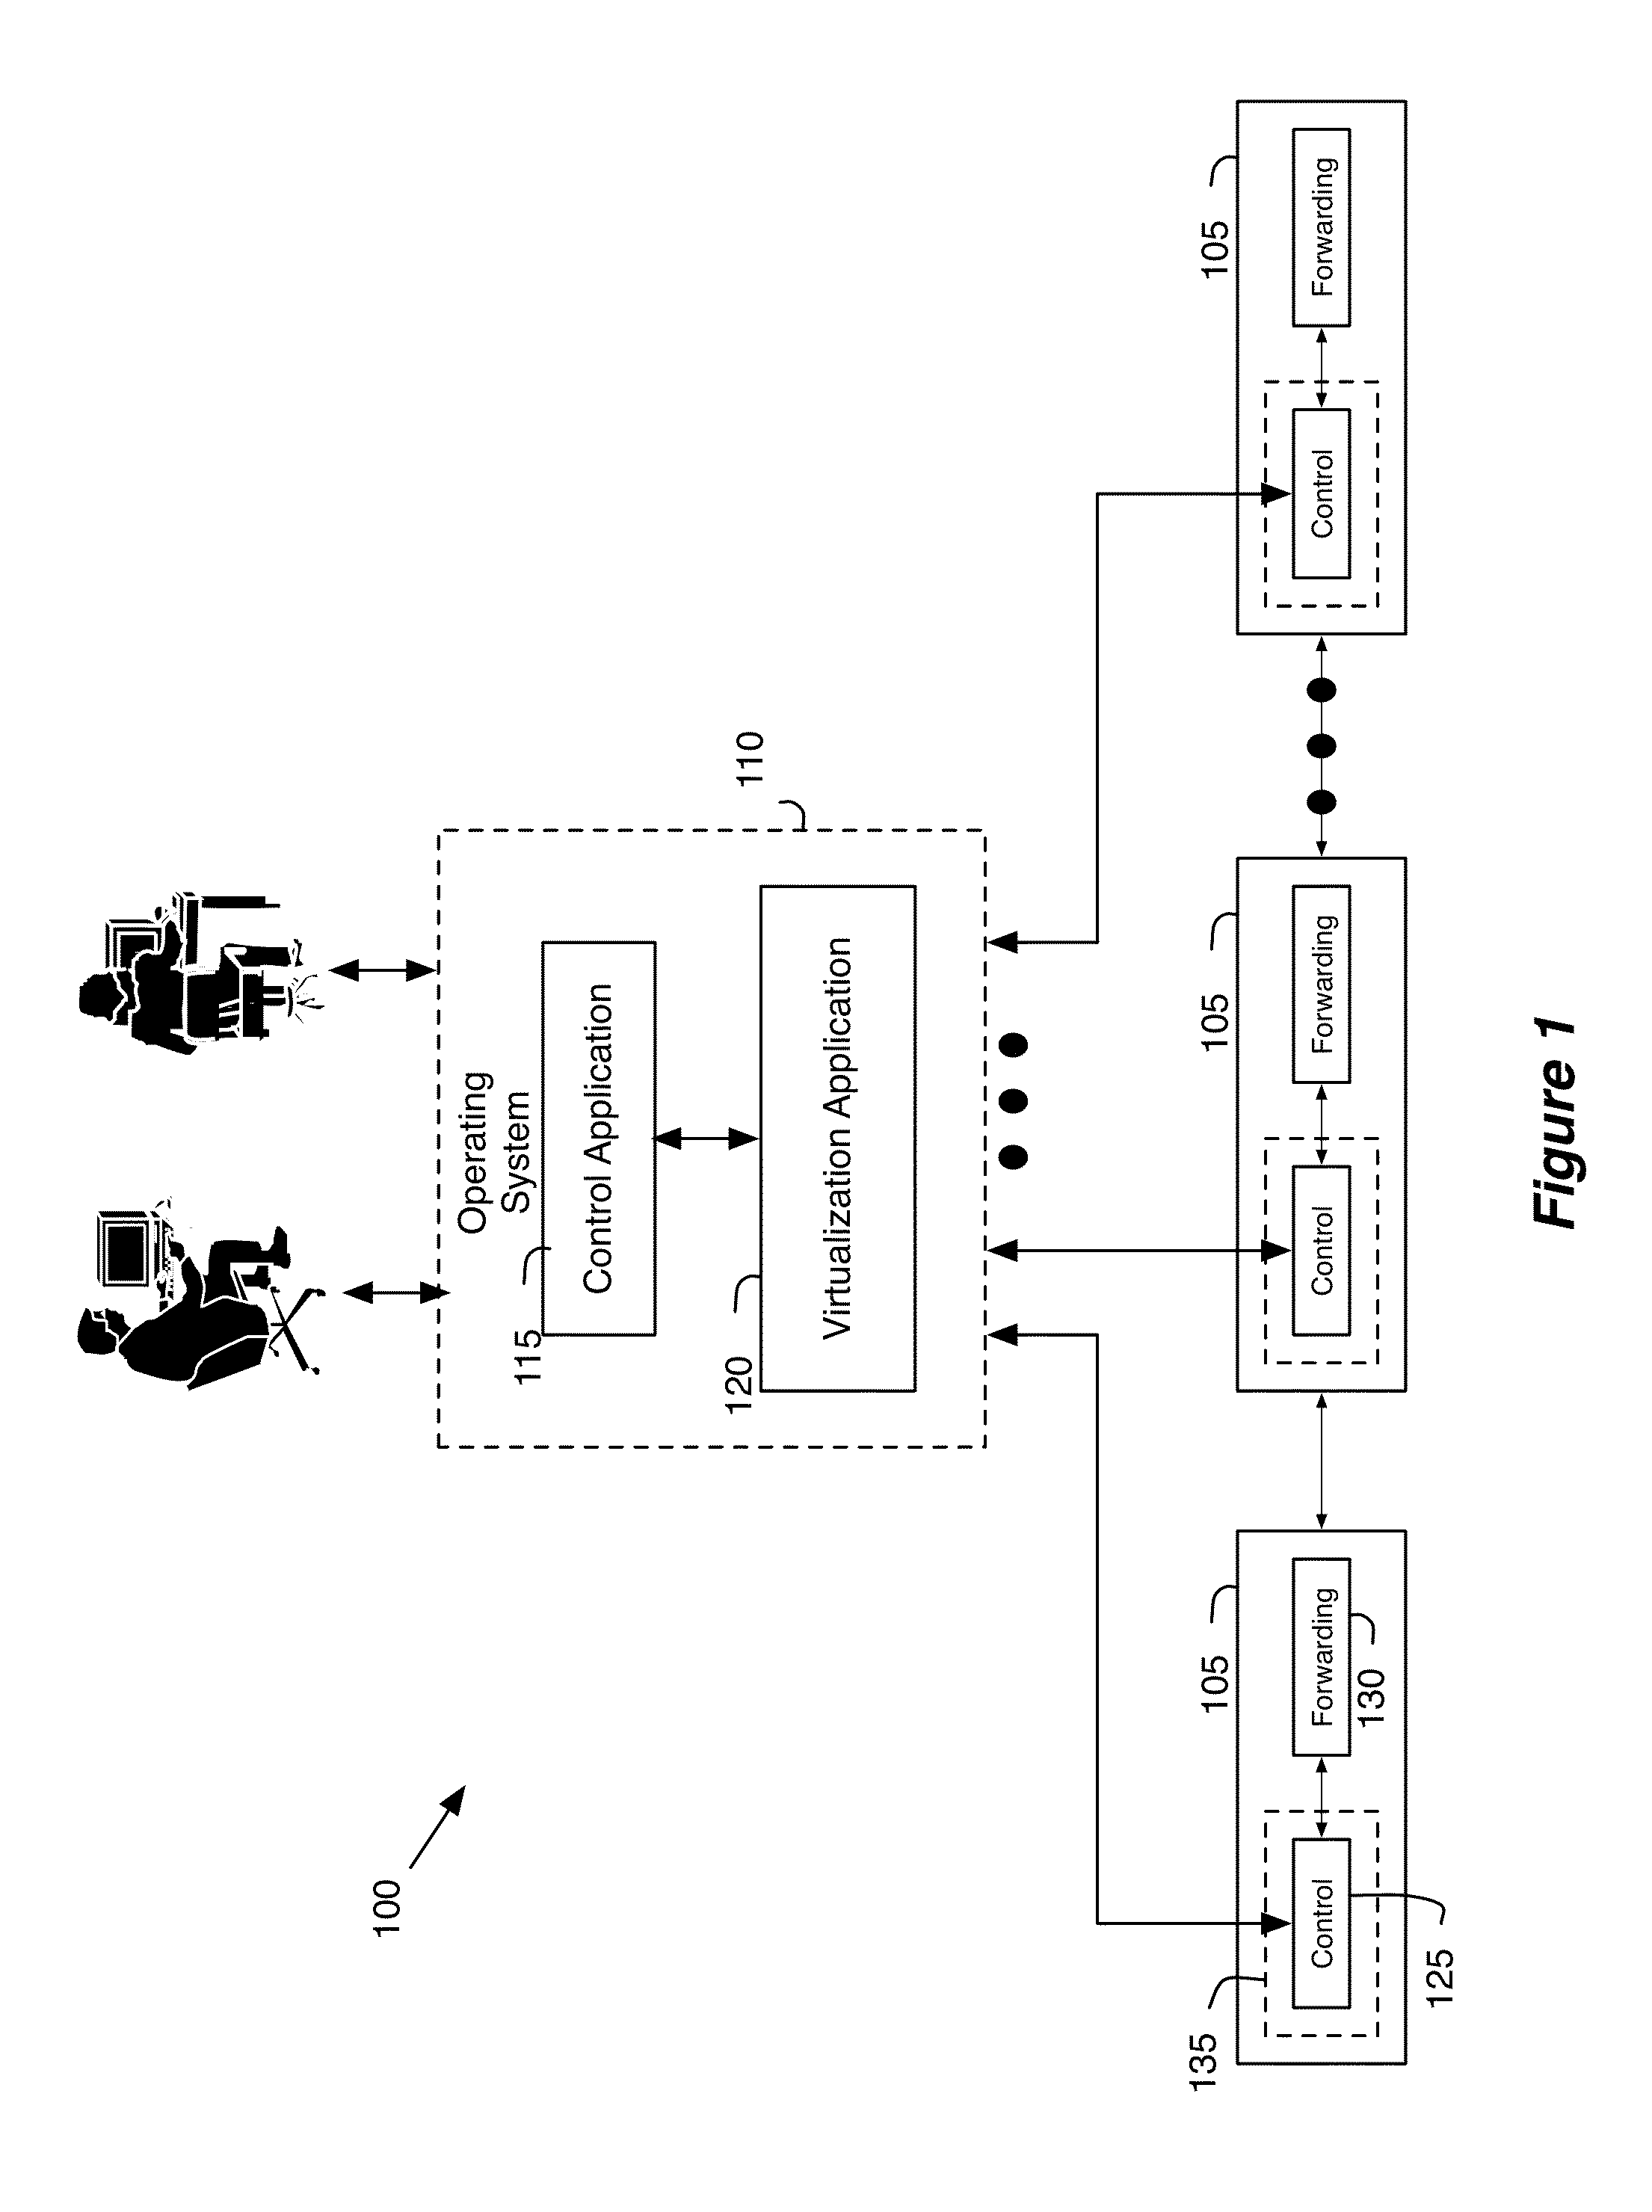 Scheduling distribution of logical control plane data